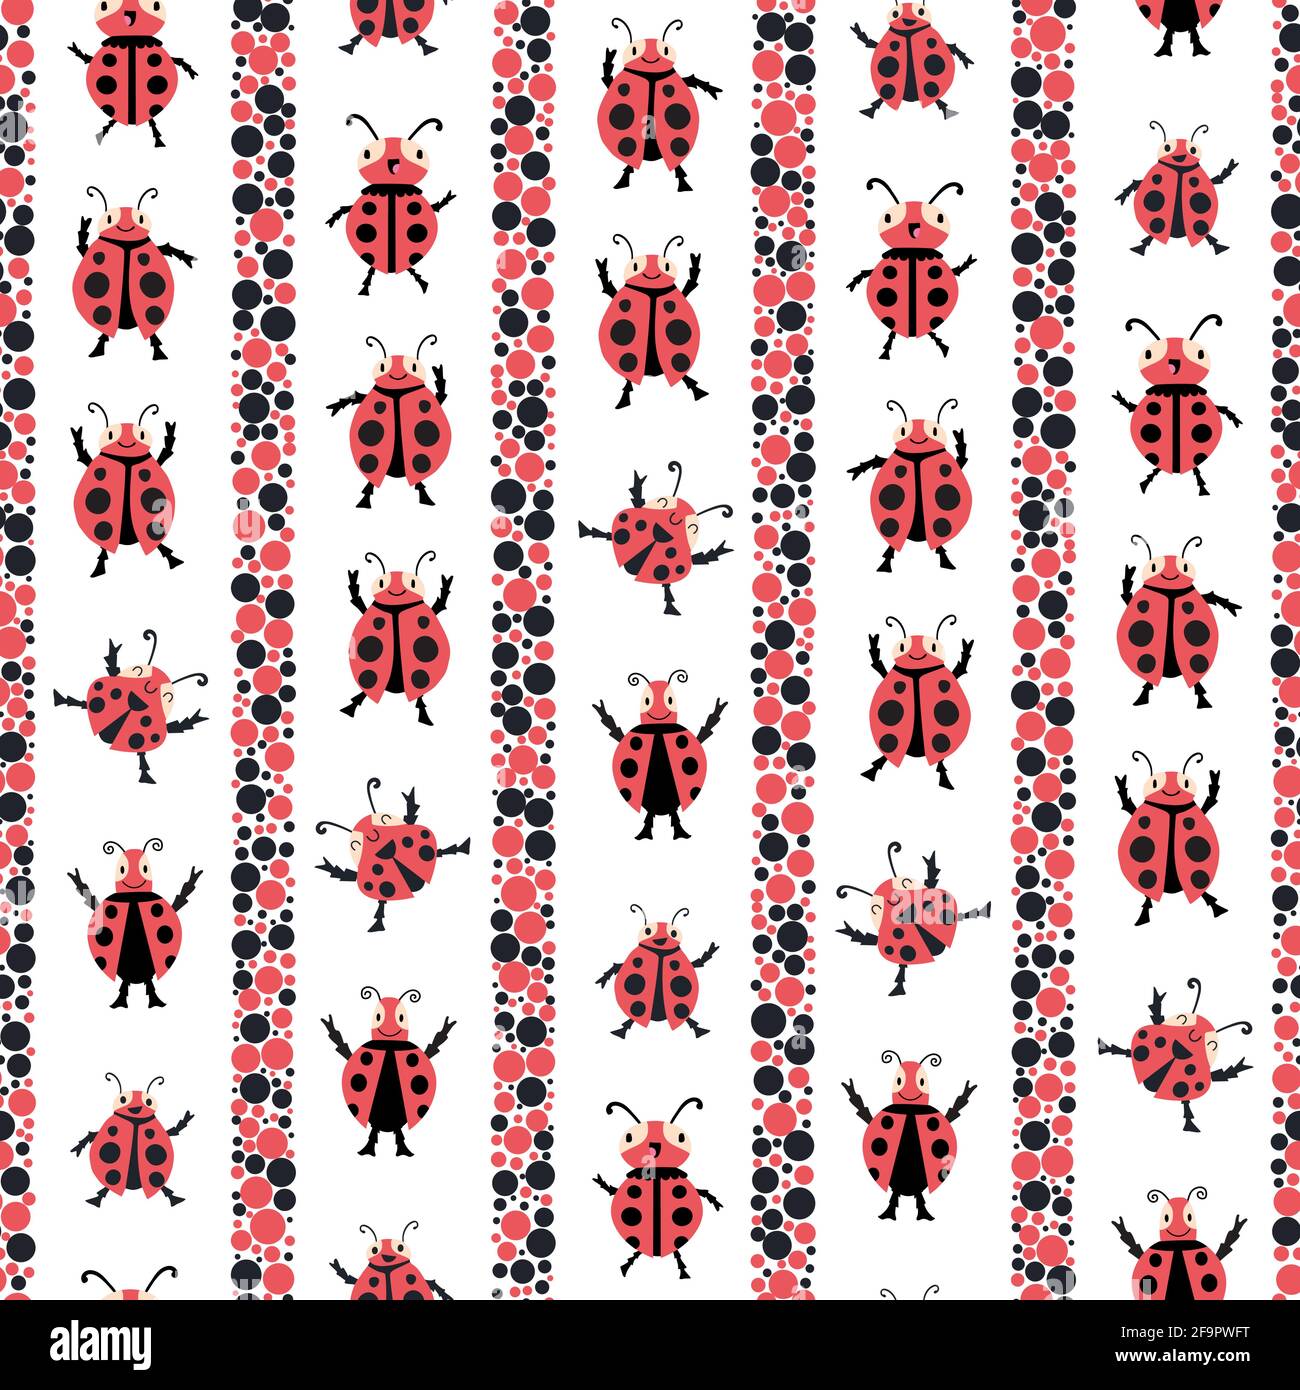 Cute dancing ladybirds stripe seamless vector pattern background. Kawaii ladybugs in childlike drawing style with vertical dot bubble fill stripes Stock Vector